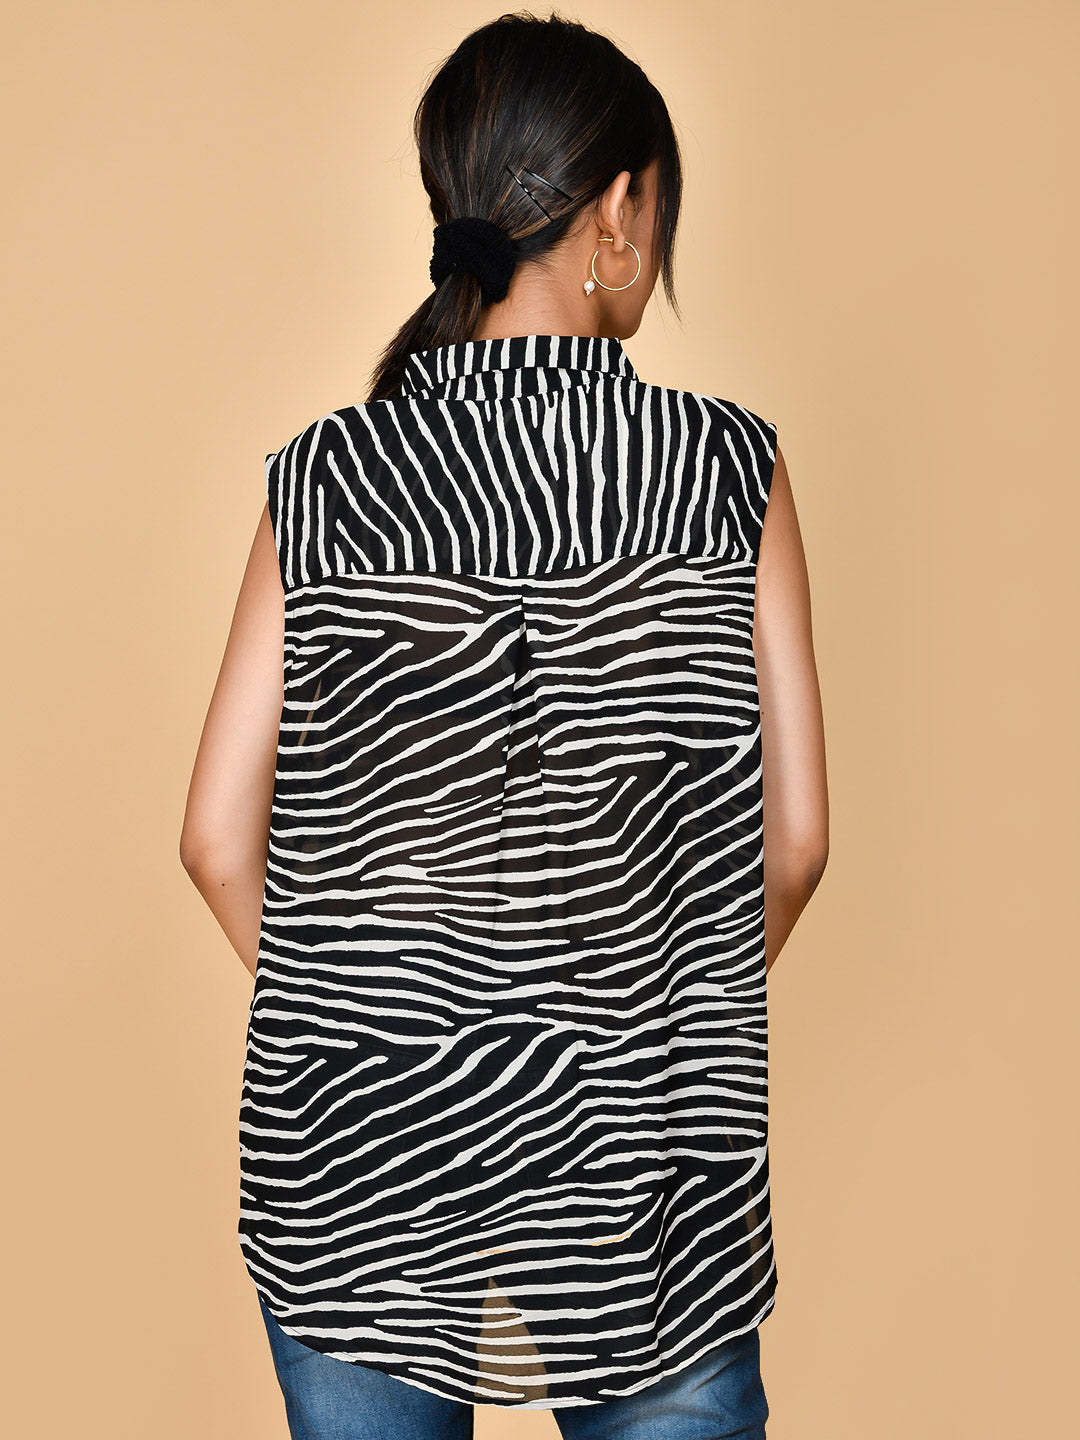 Shop This beautiful georgette striped sleeveless shirt top is designed for women and girls. Made with high quality fabric, it offers both comfort and style. The classic striped pattern adds a touch of elegance, making it perfect for casual or dressy occasions. With its sleeveless design, it is perfect for warm weather and can be easily dressed up or down.